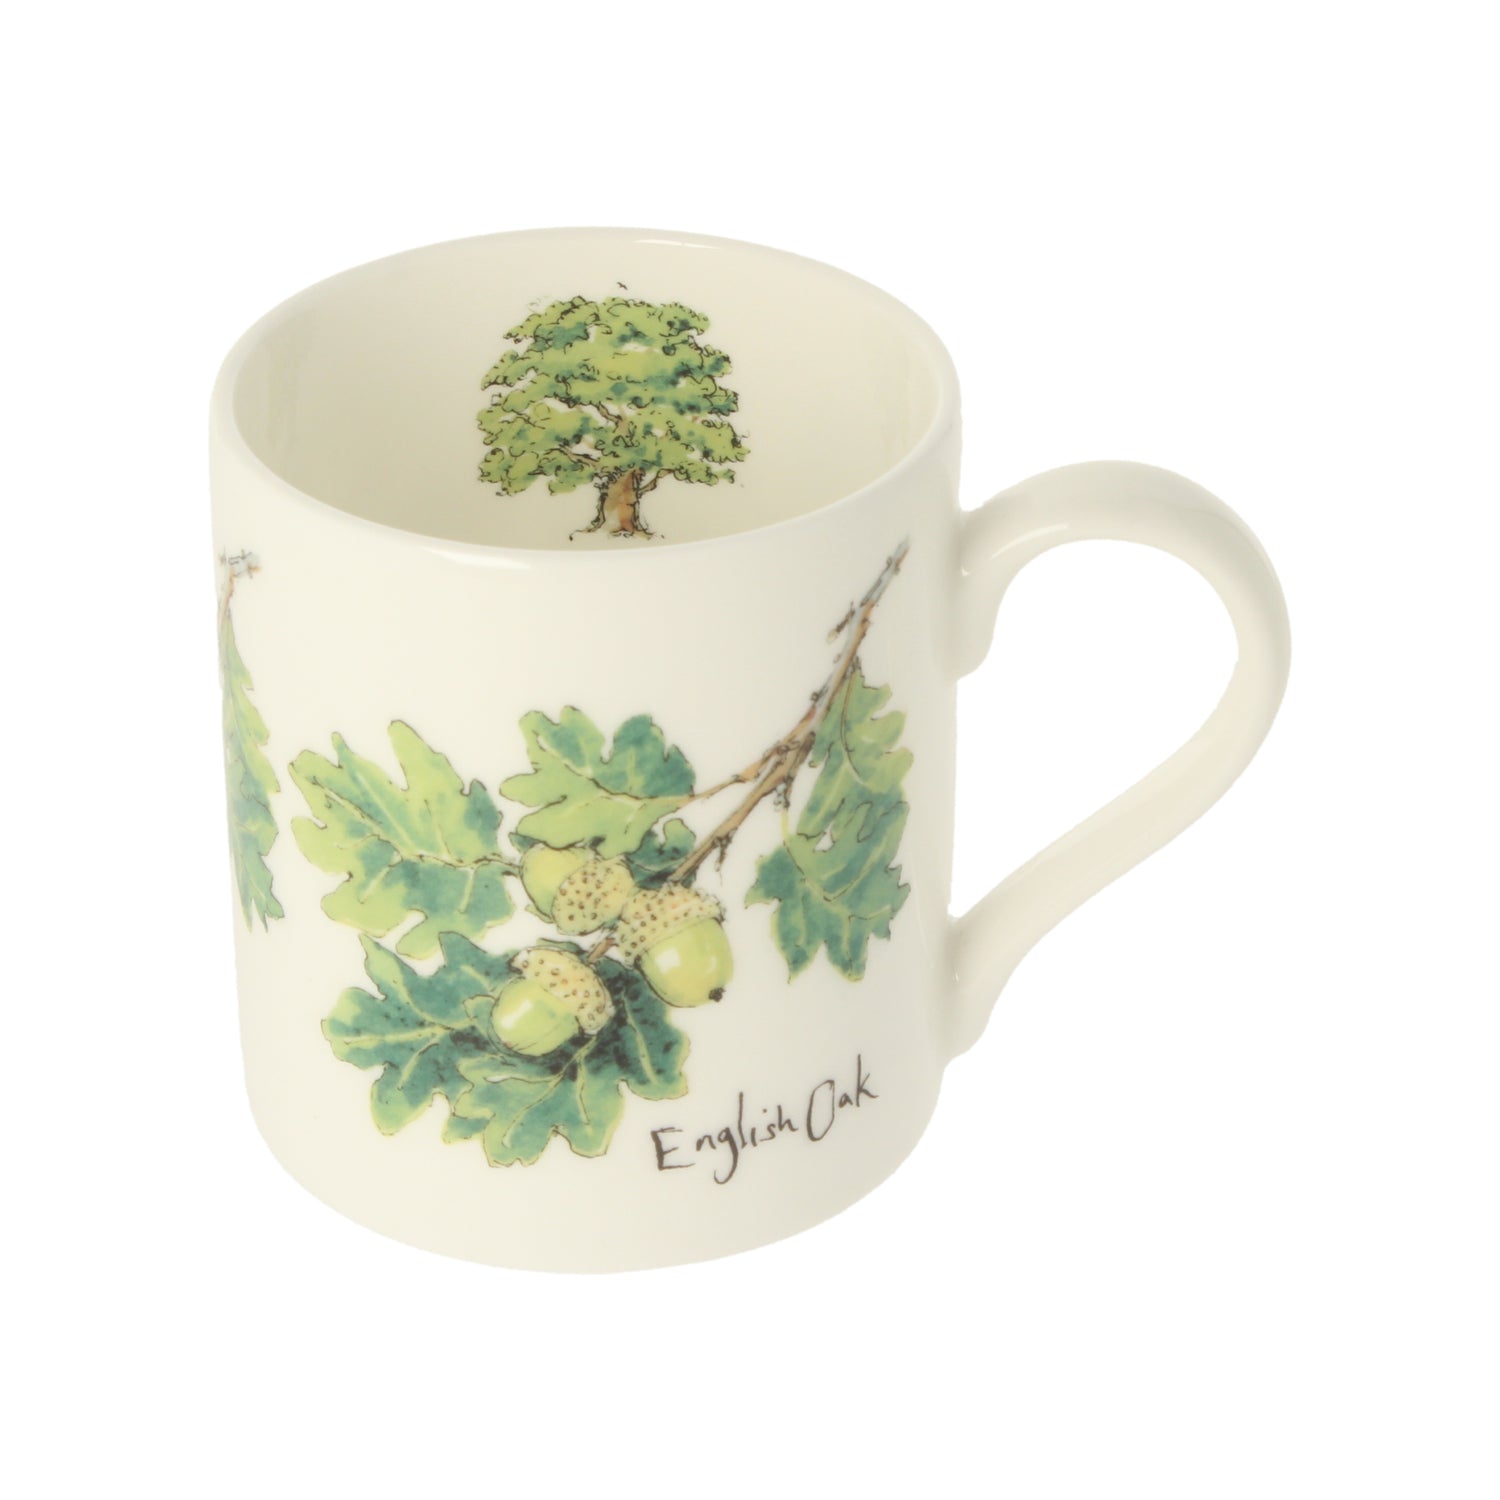 Out In The Fields English Oak Mug